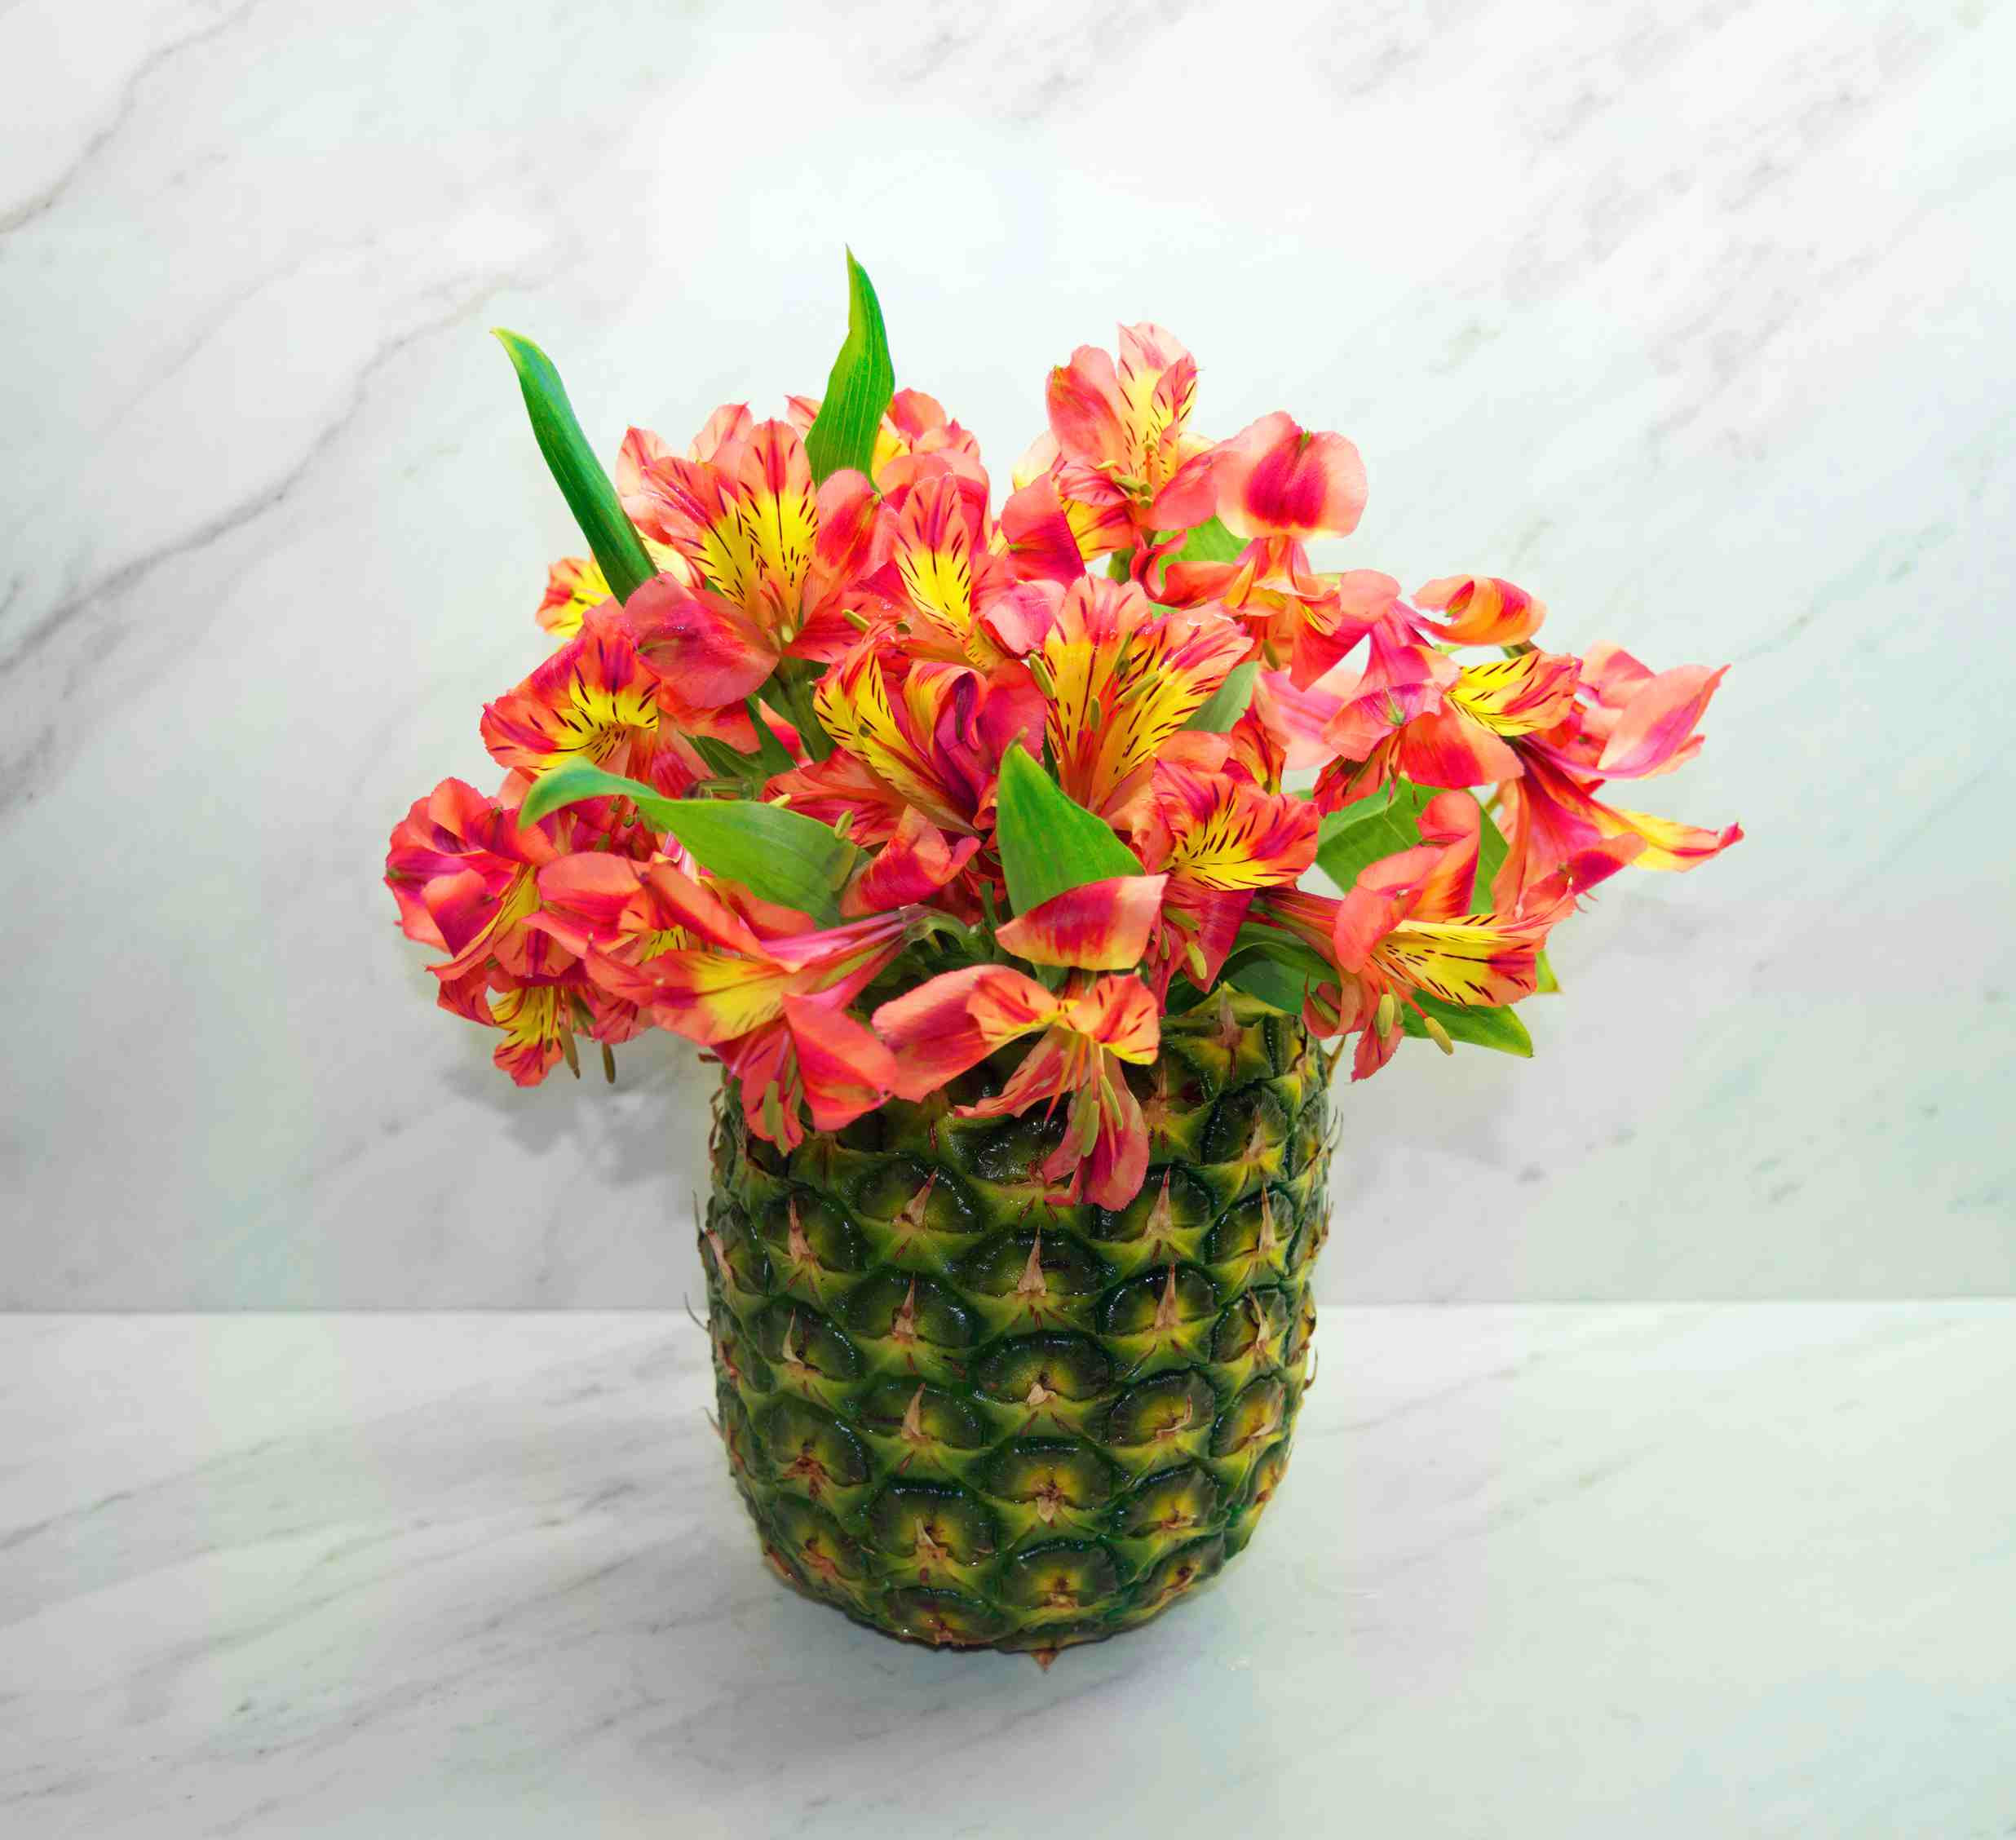 16 Recommended Small Glass Vase Flower Arrangements 2024 free download small glass vase flower arrangements of diy pineapple vase floral arrangement with diy pineapple vase 56a262c53df78cf77274f3c3